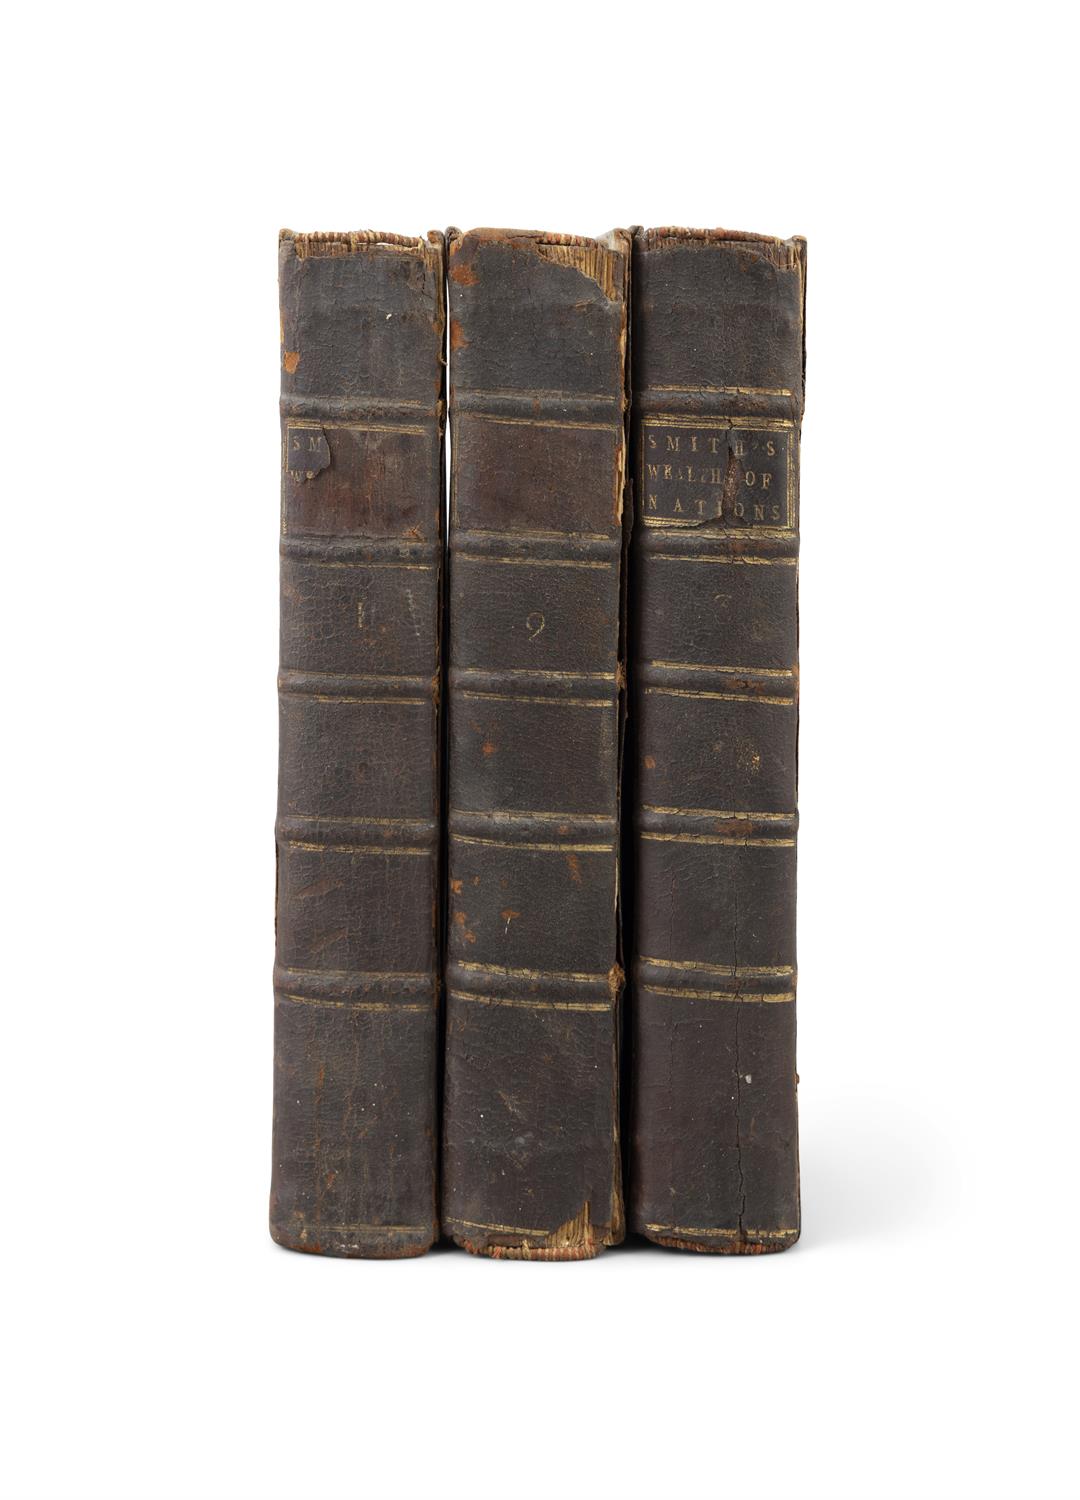 SMITH, Adam [1723-1790] An Inquiry into the Nature and Causes of the Wealth of Nations (3 vols. - Image 2 of 4